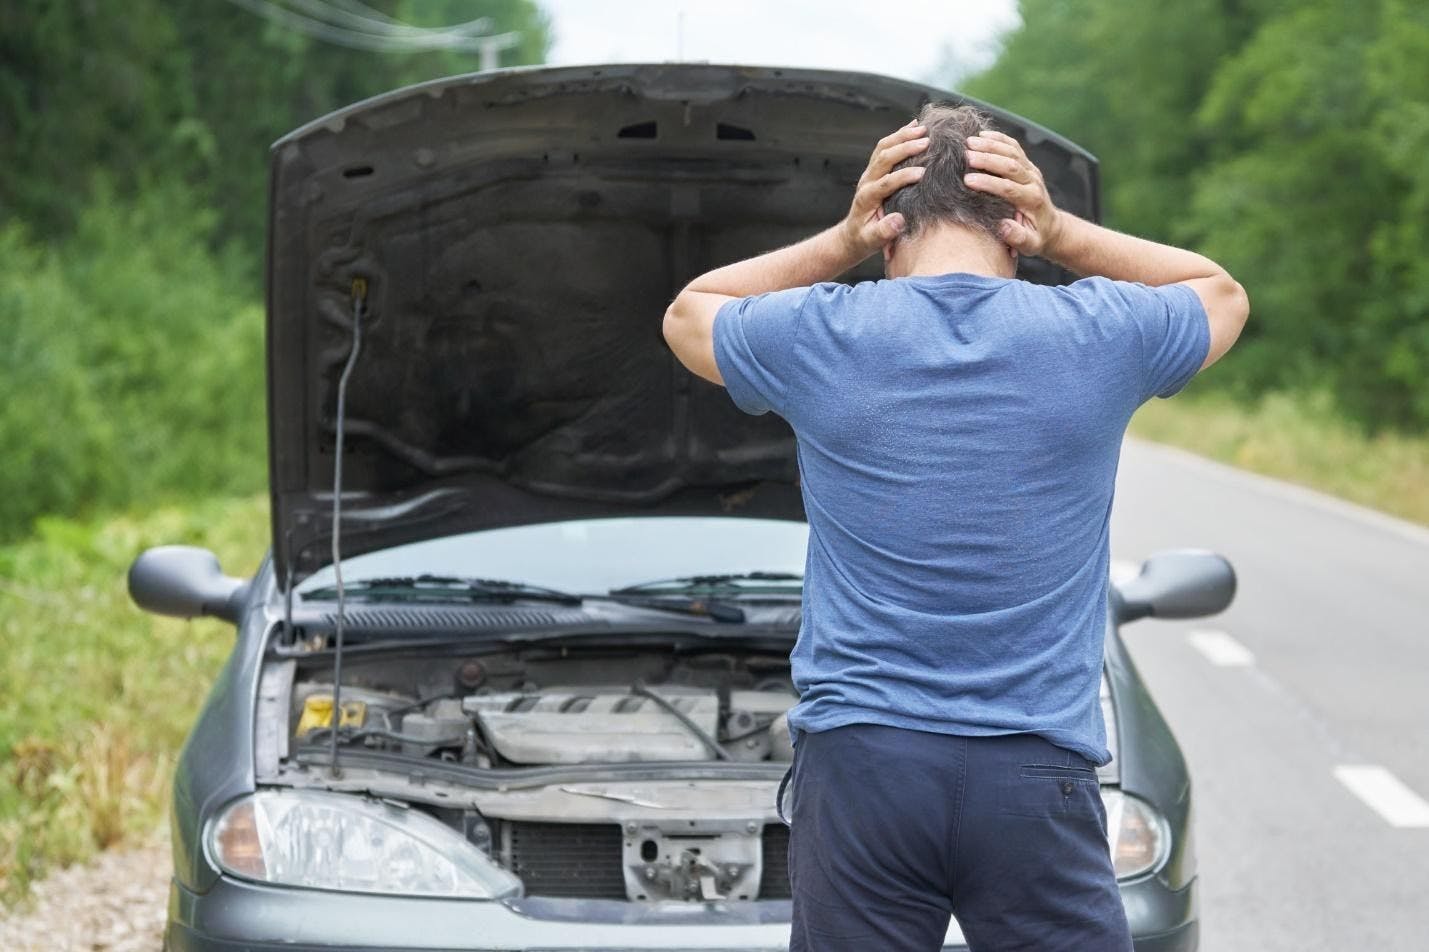 Honda Roadside Assistance: What You Need to Know